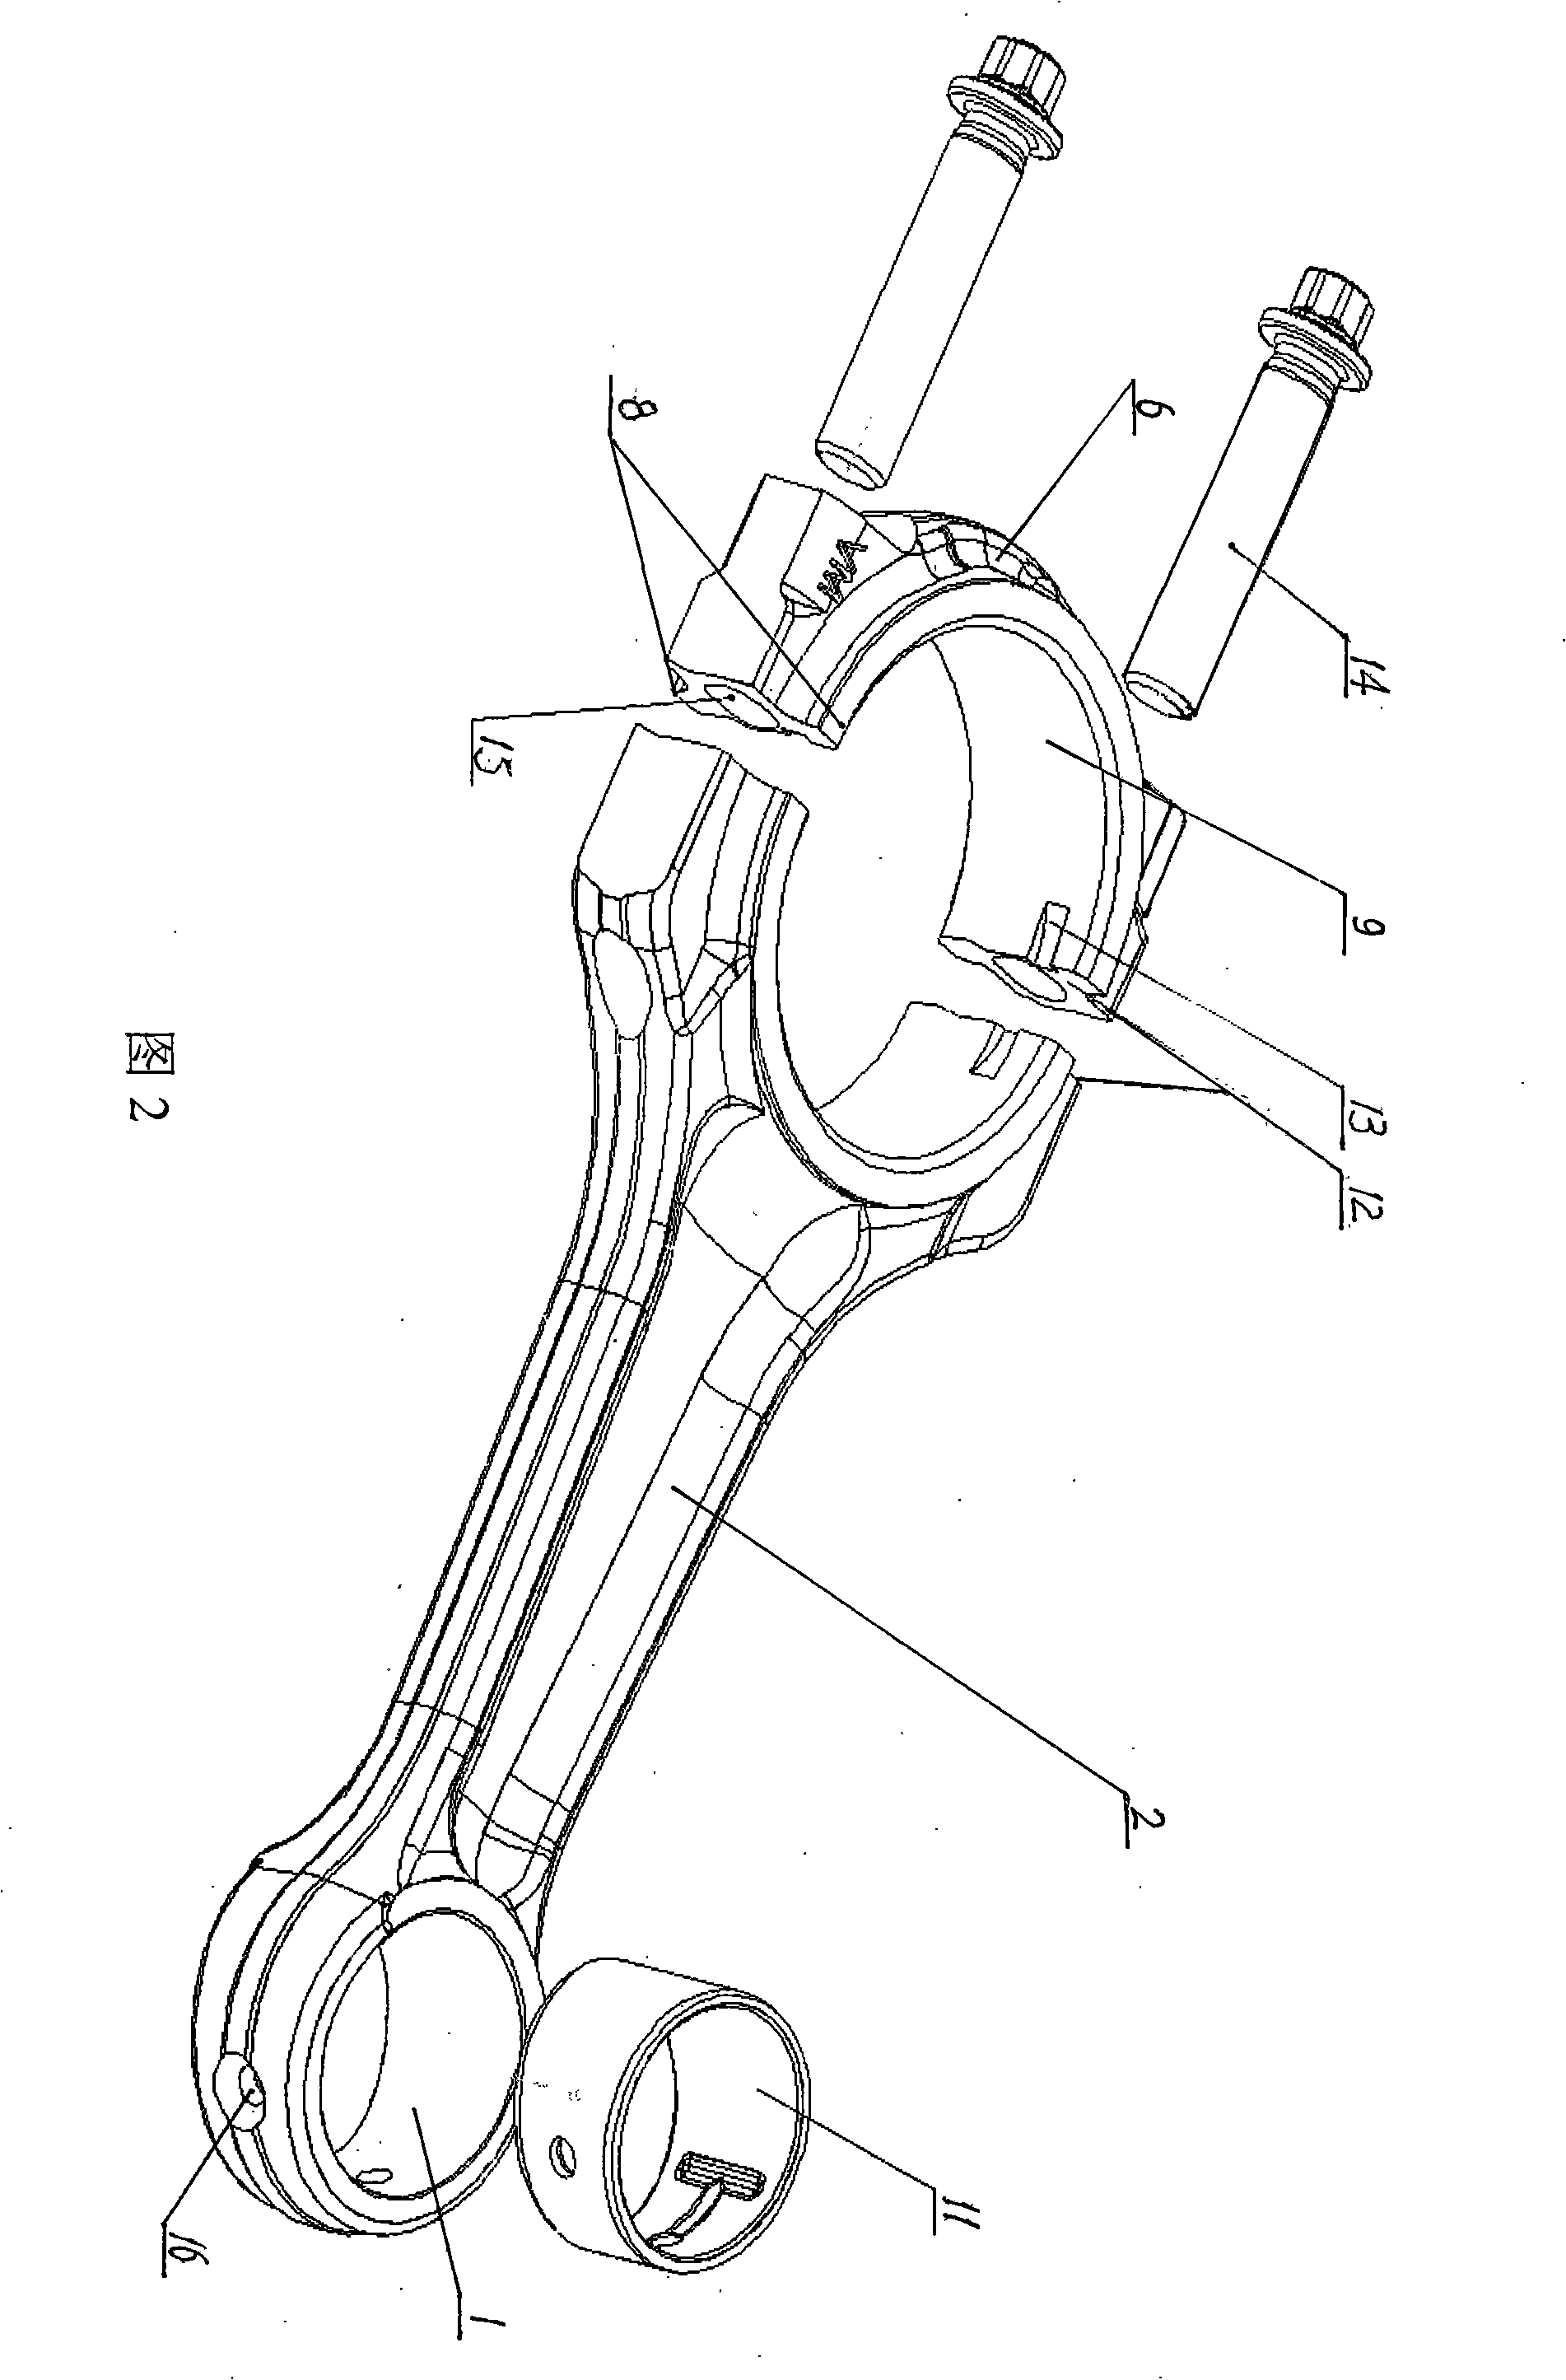 Method for processing fractured connecting rod for car engine